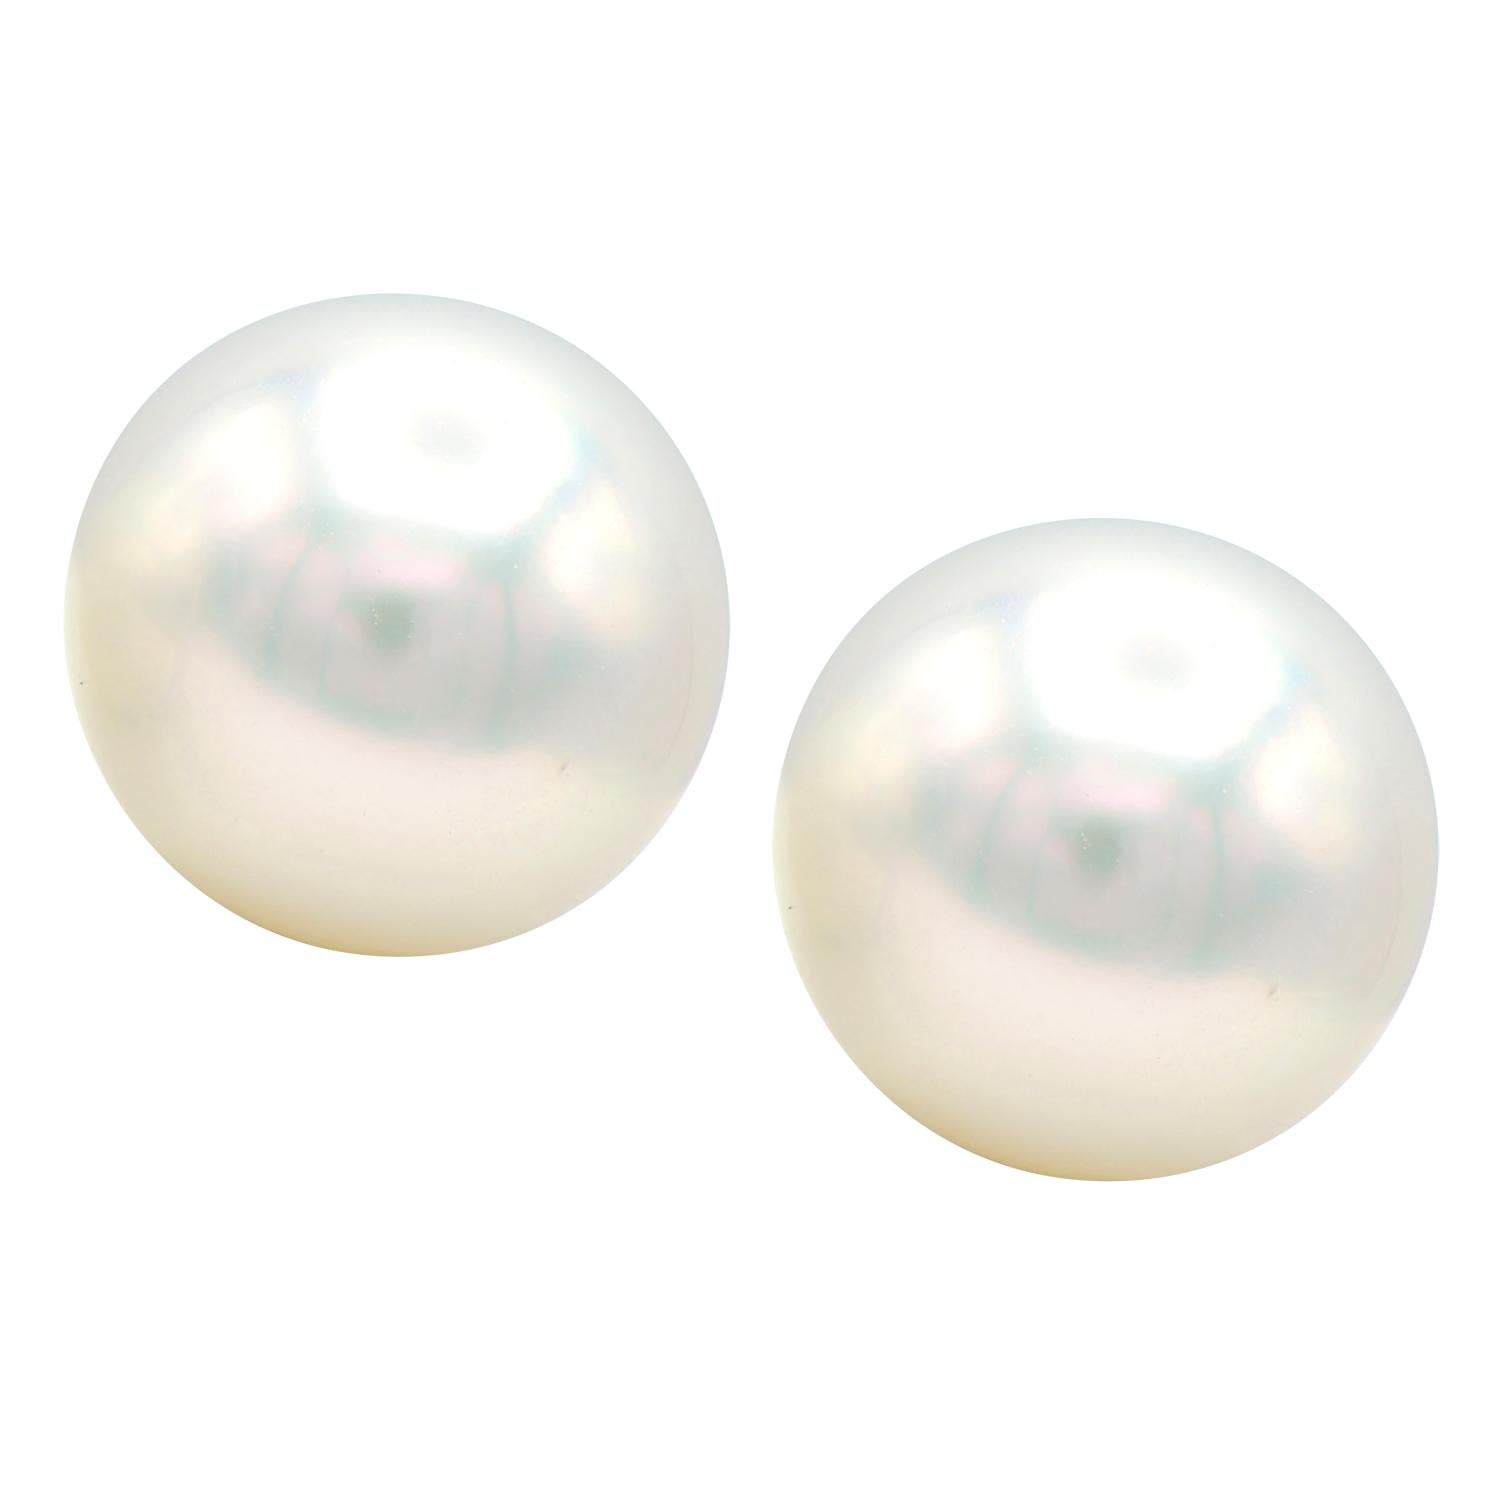 South Sea Pearl Stud Earrings are a classic and timeless piece of jewelry that should be owned by everyone. South Sea studs are slightly larger than cultured pearl studs for a bigger more sophisticated look. These 9-9.5mm South Sea Pearl Studs are